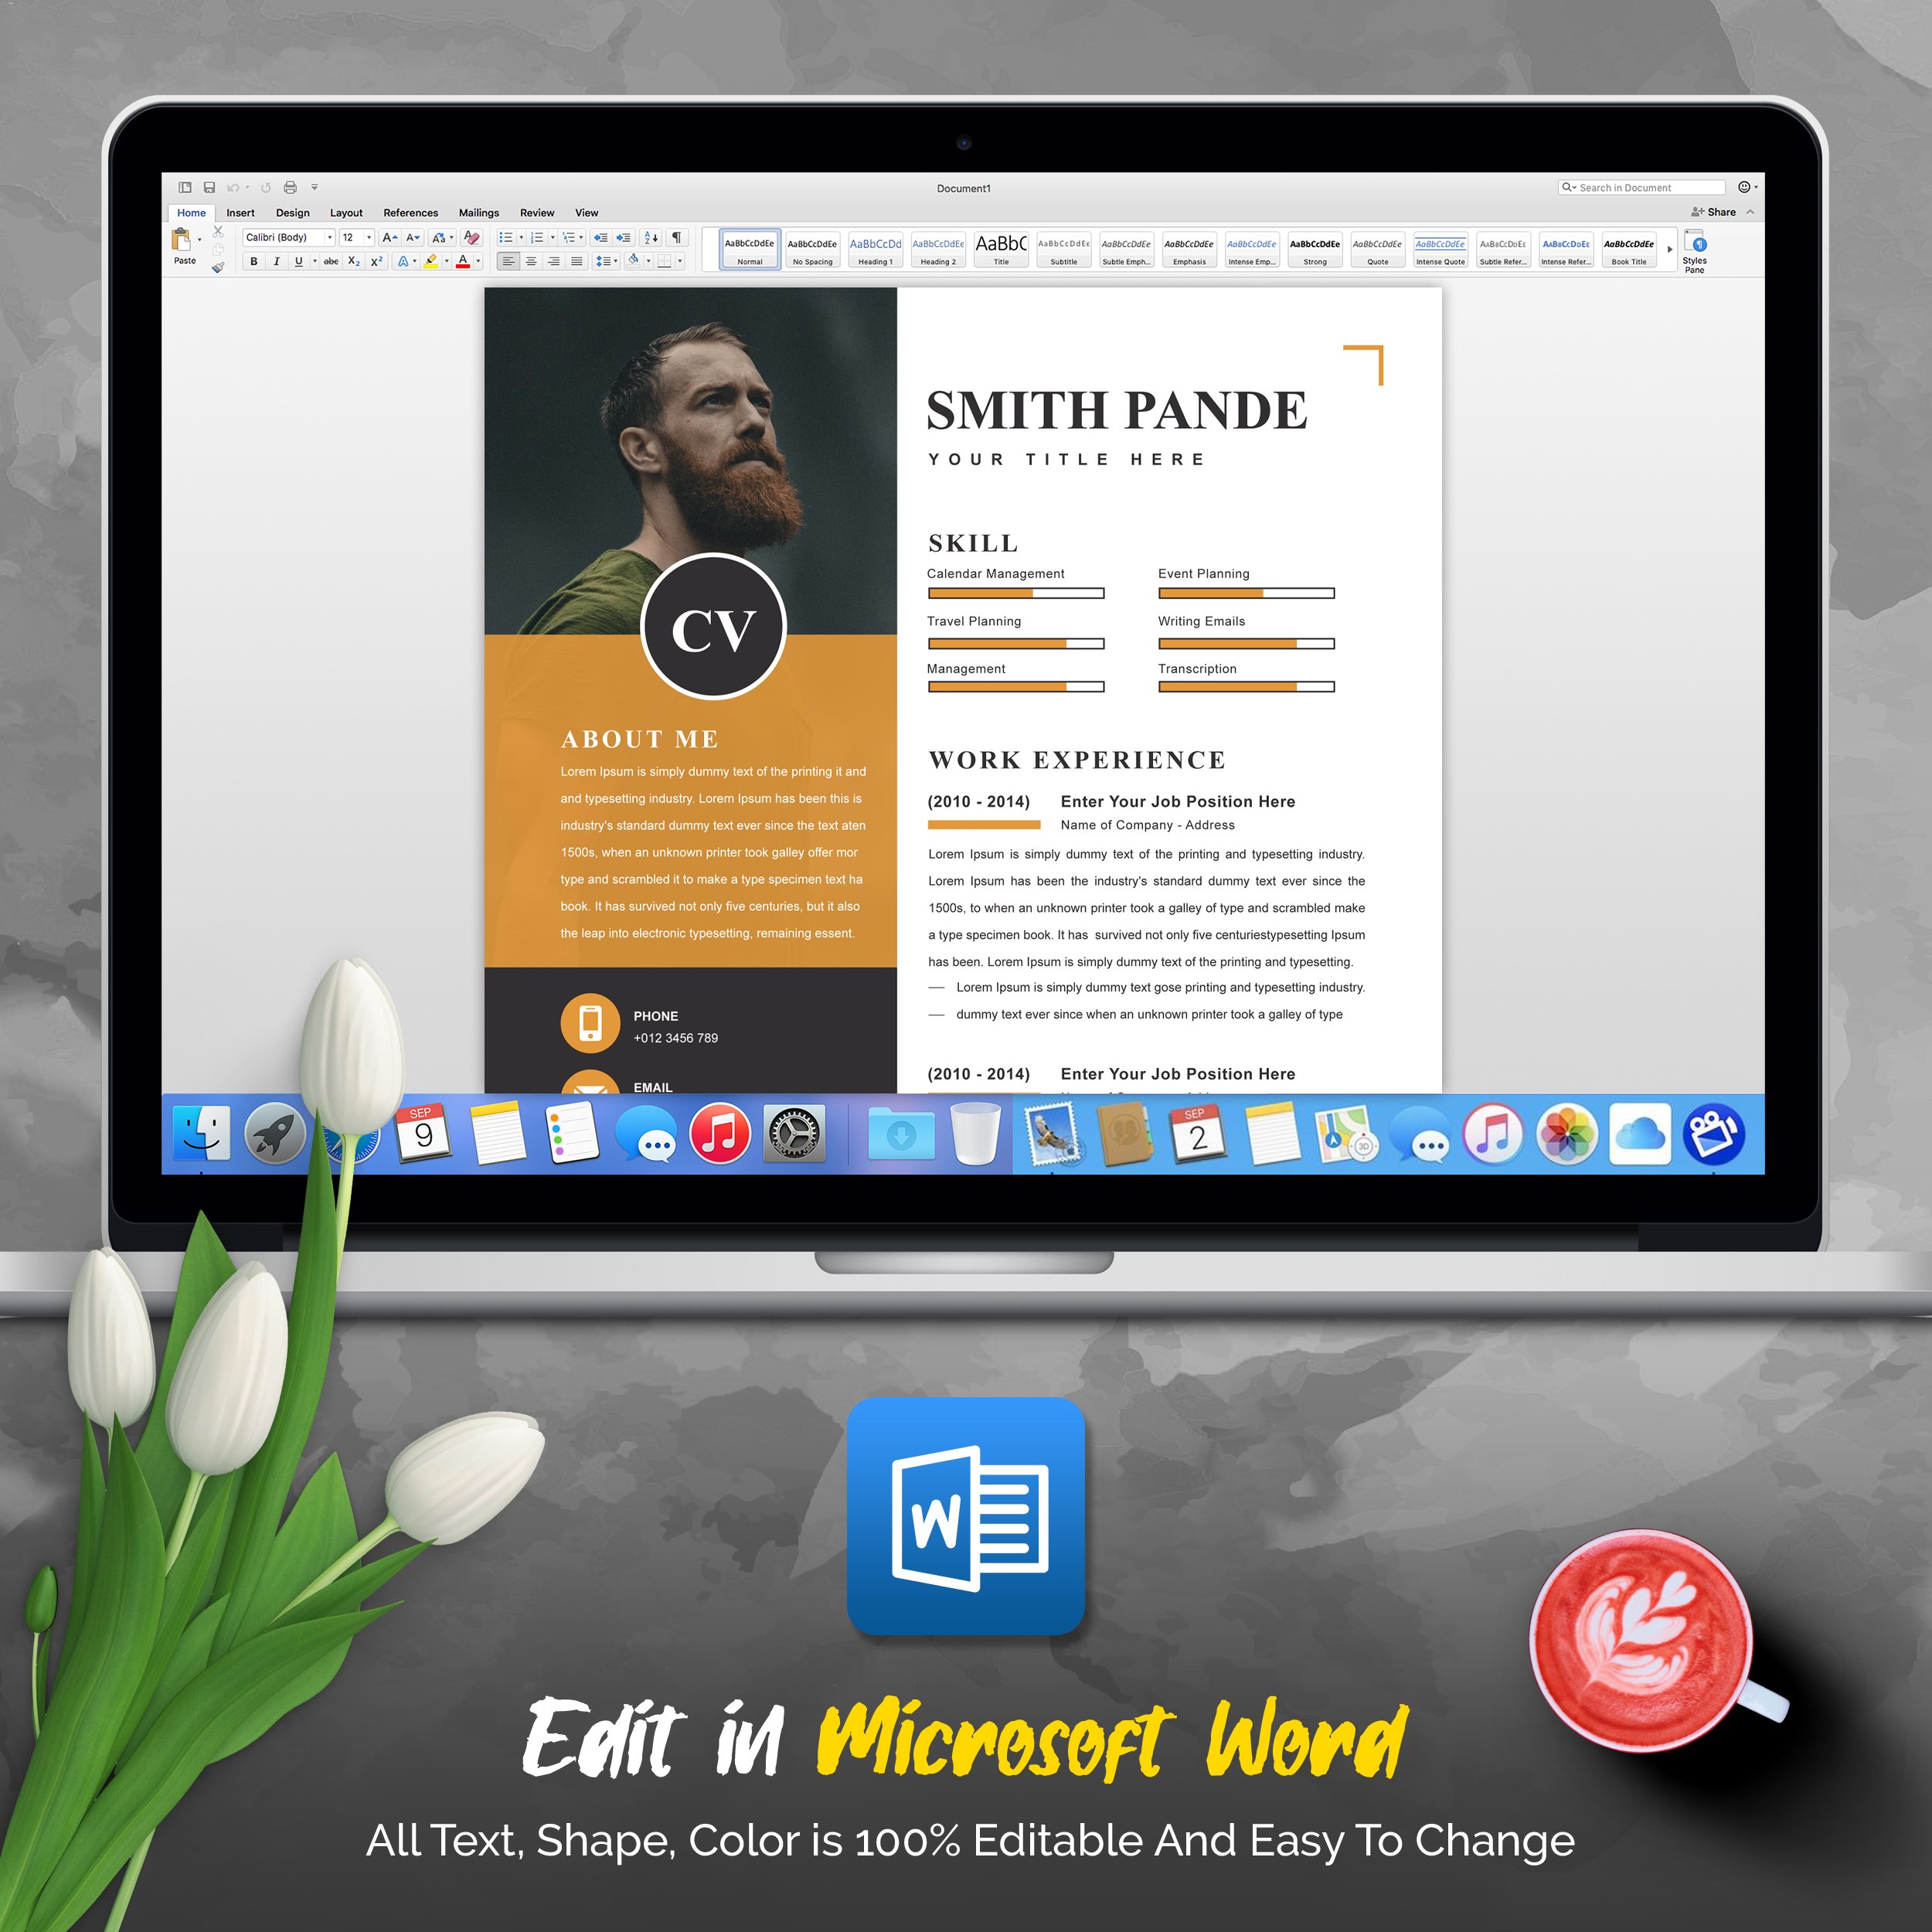 04 3 pages professional ms word aple pages eps photoshop psd resume cv design template design by resume inventor 342